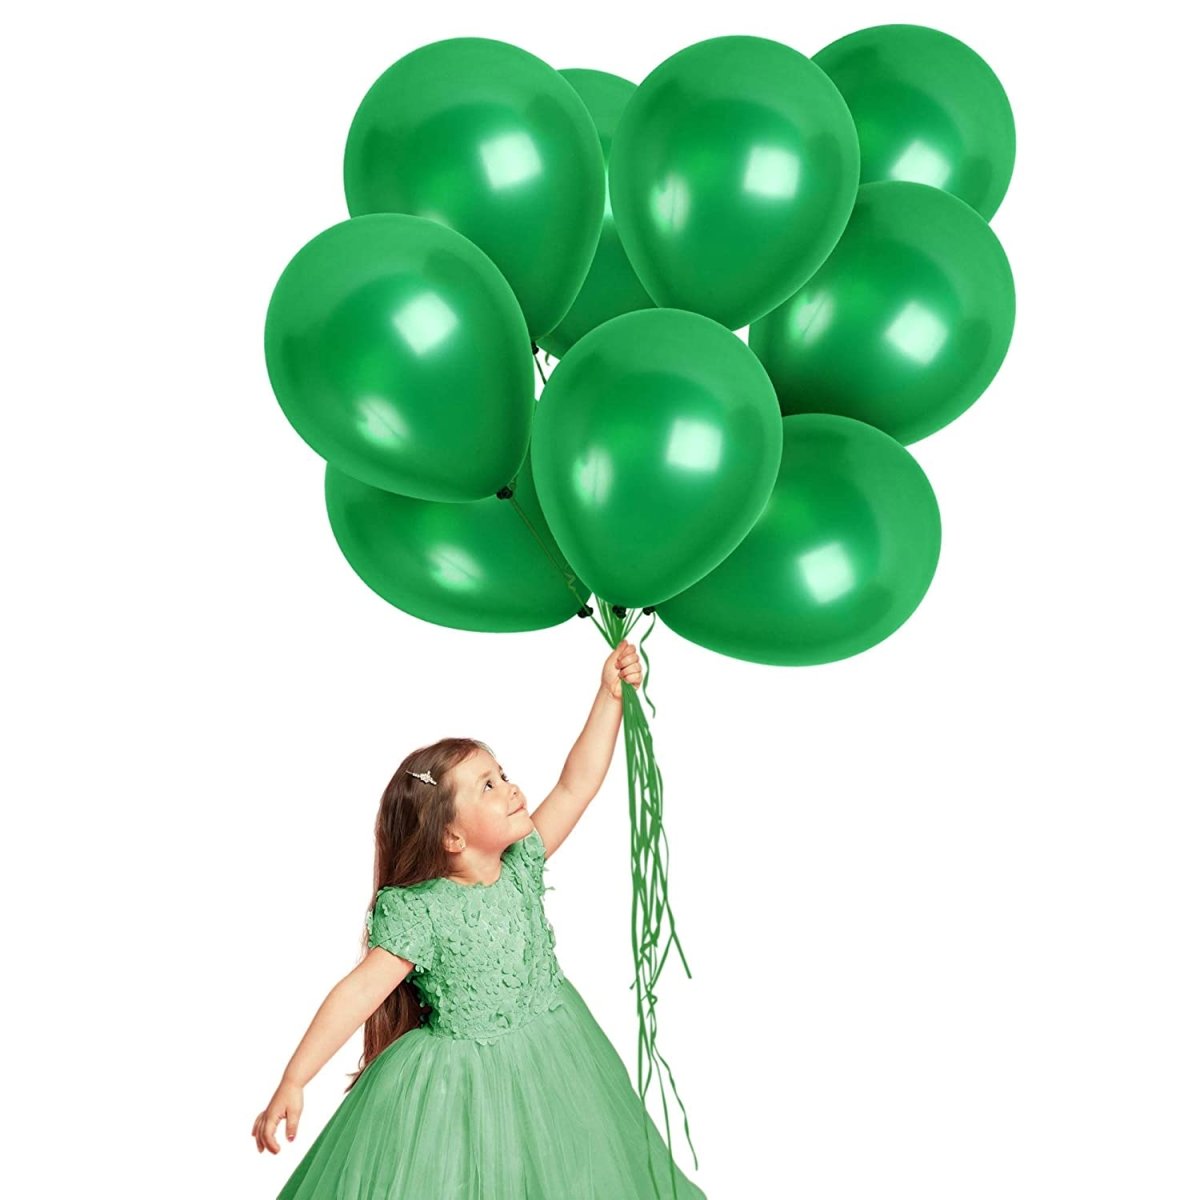 Green metallic latex balloons for birthday decorations, anniversary, bachelorette, baby shower, kids decoration, green balloons party supply